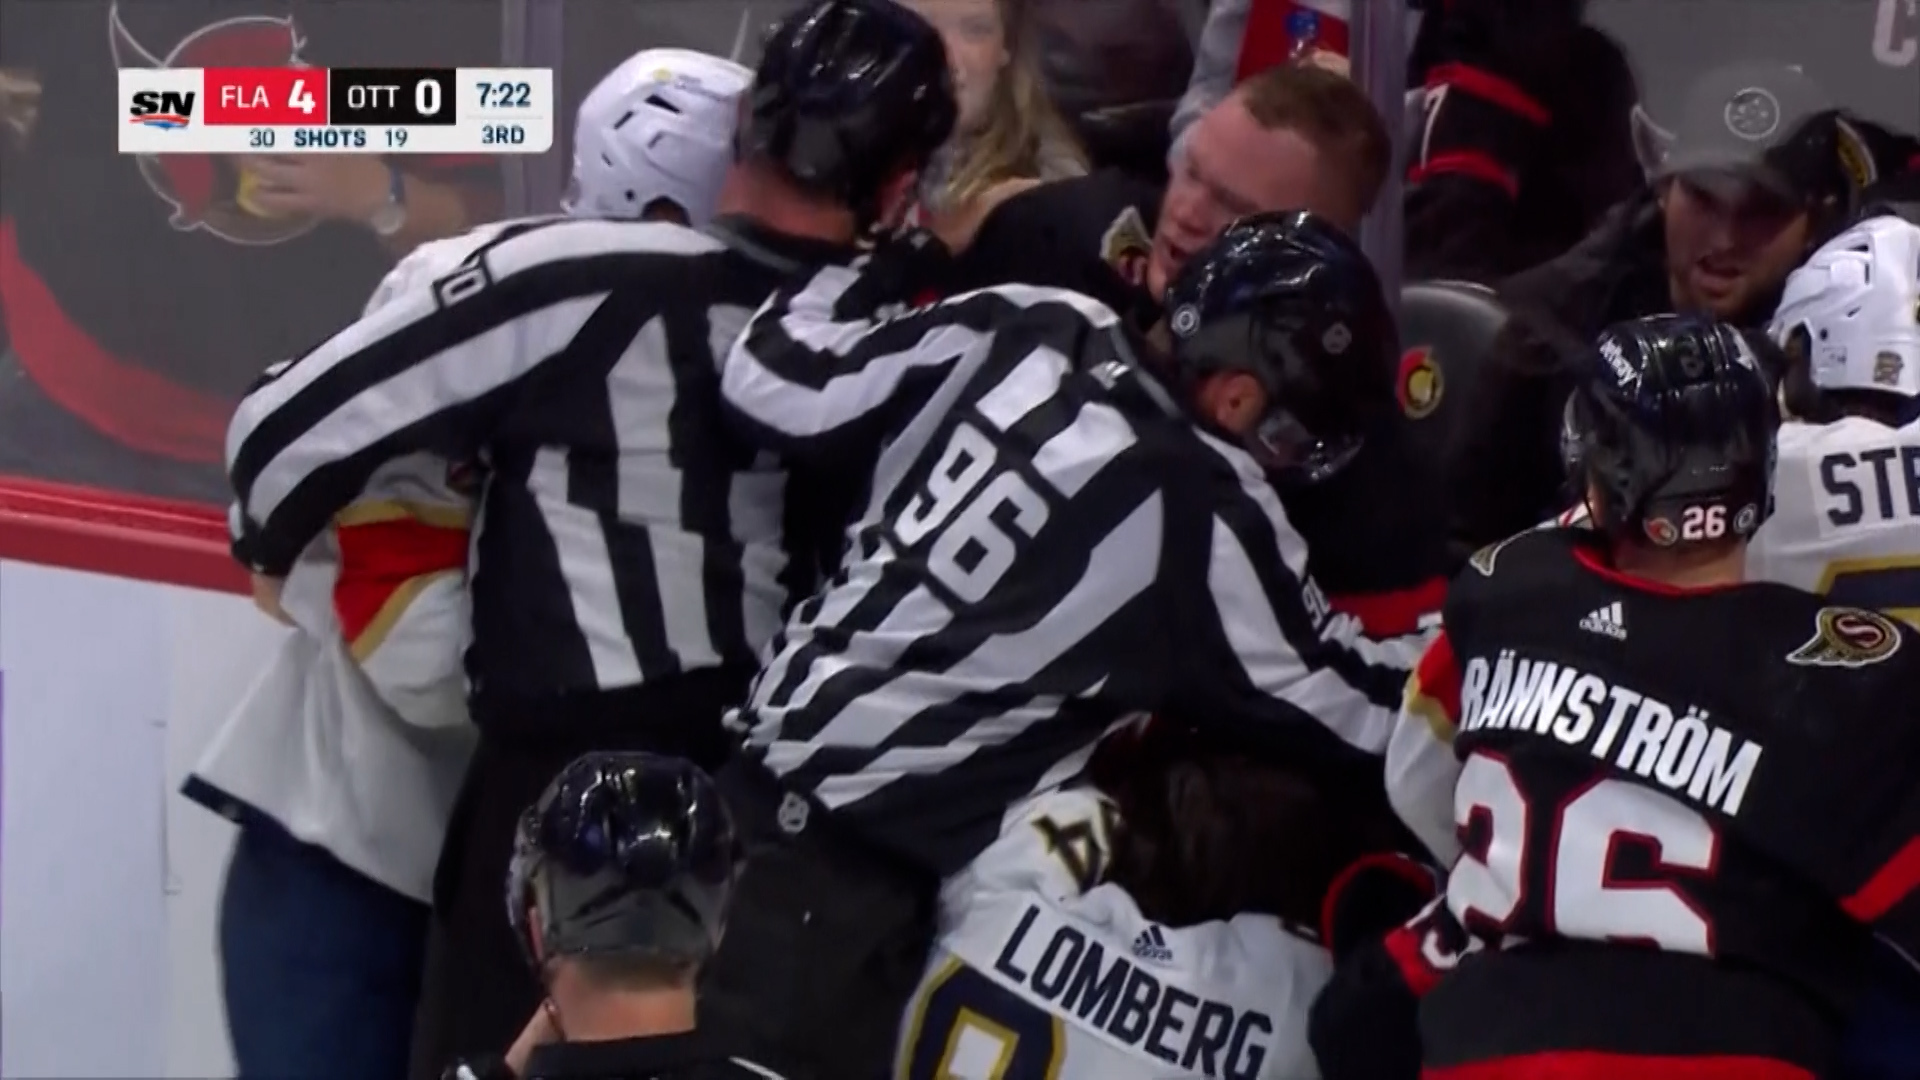 Ten players suspended for 10 minutes after brutal NHL brawl in Panthers vs Senators